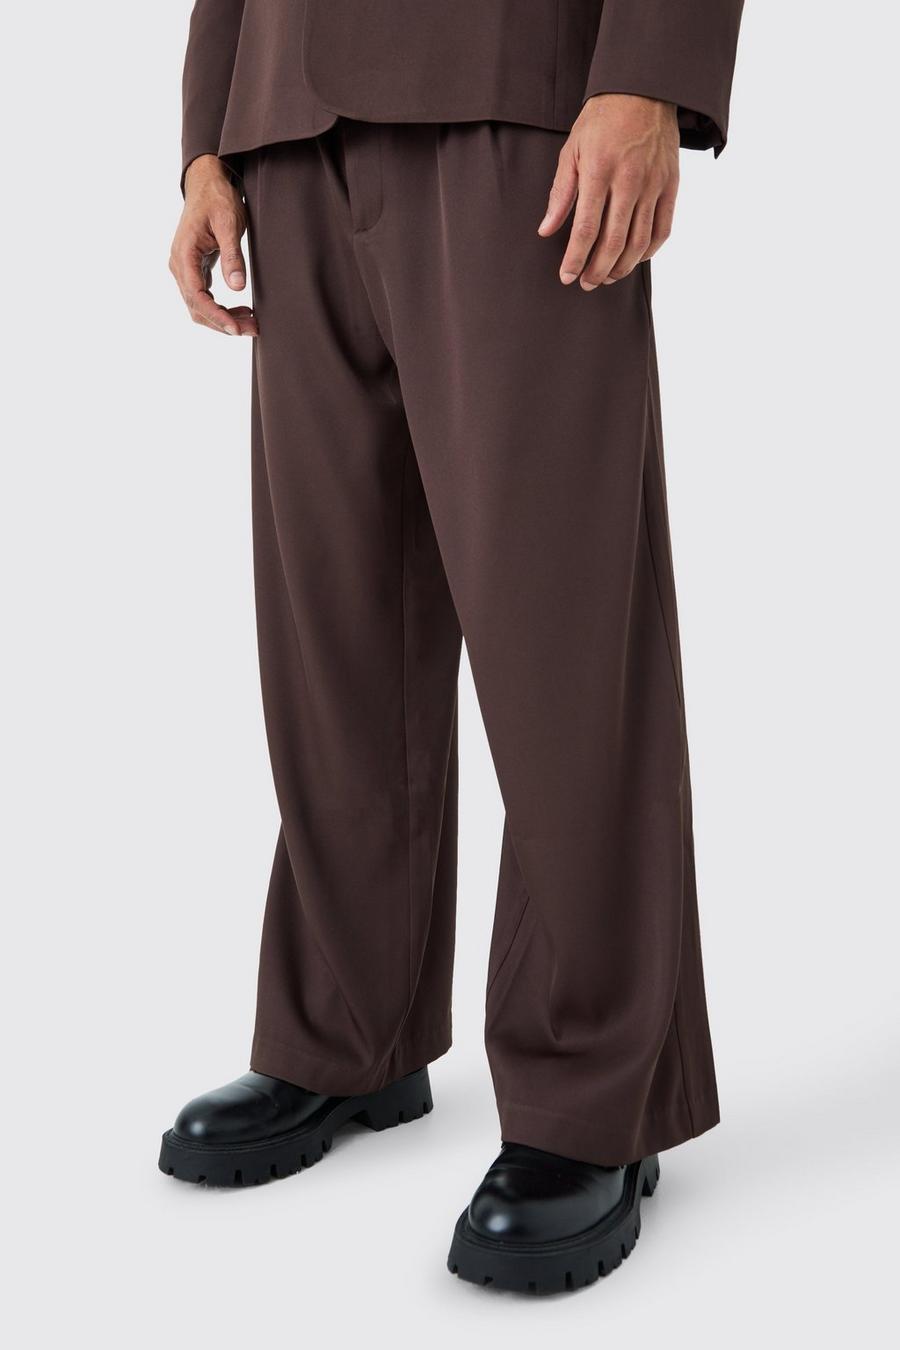 Chocolate Mix & Match Relaxed Fit Wide Leg Trousers